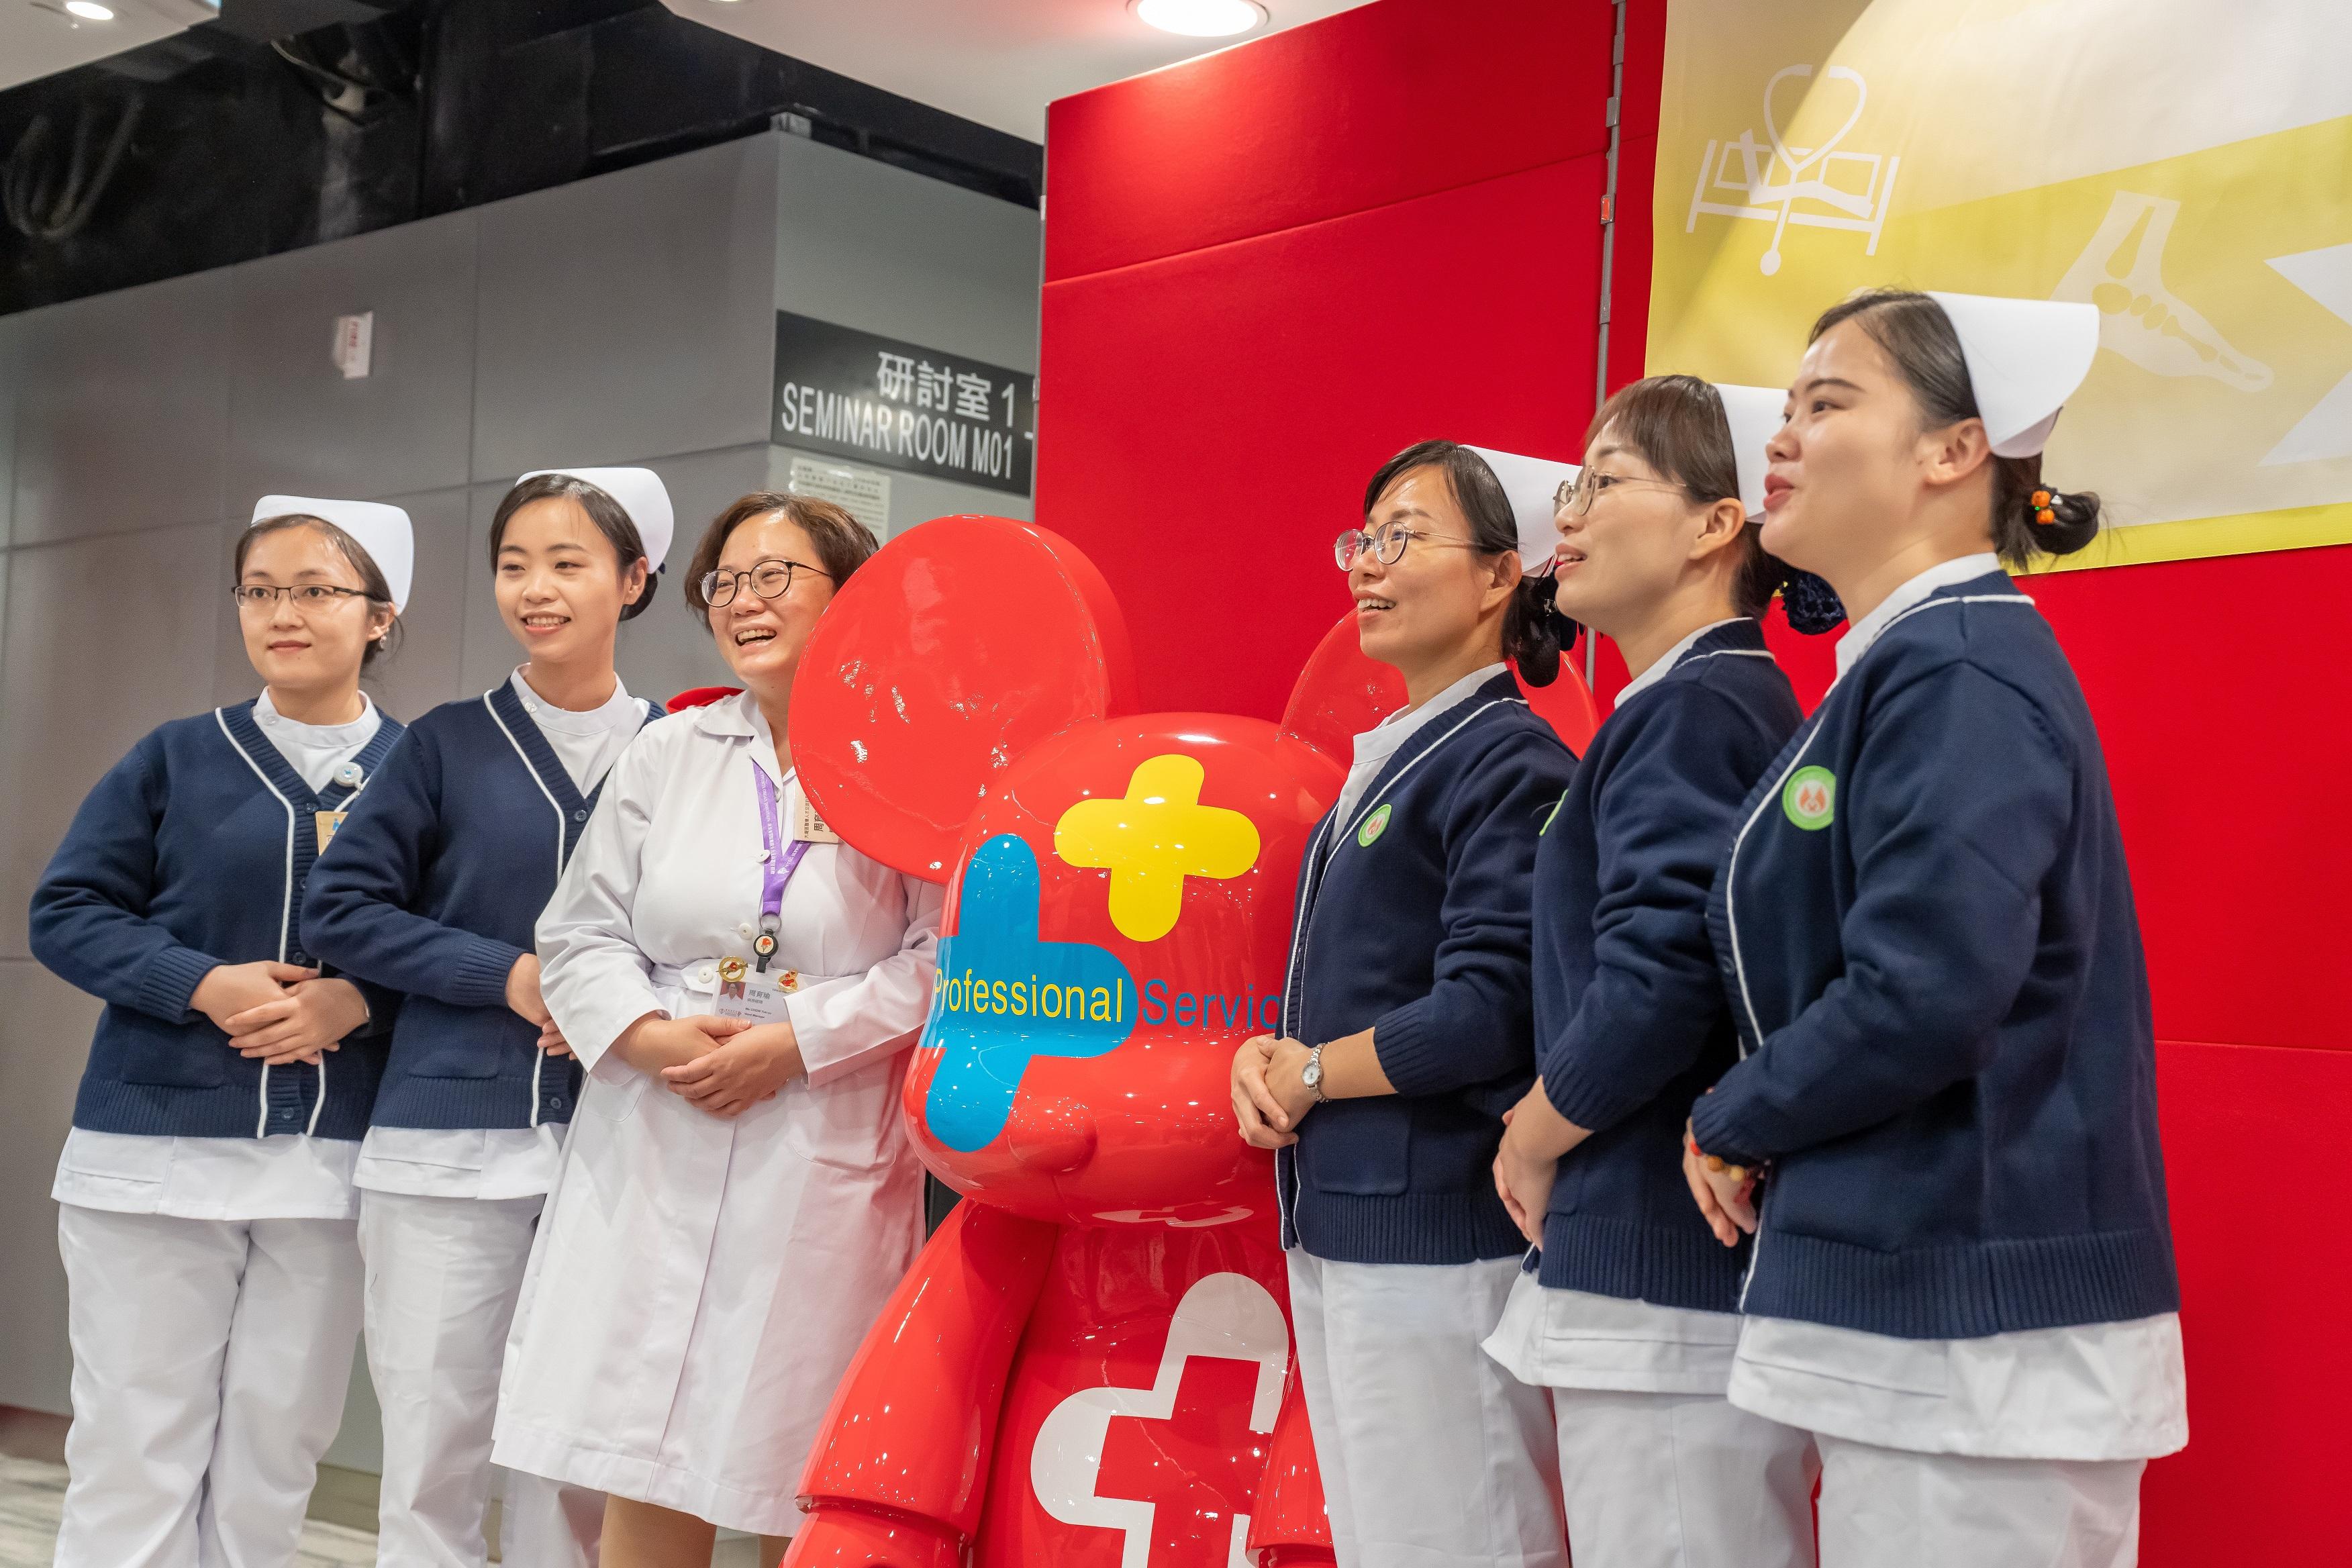 The Hospital Authority held a ceremony to welcome healthcare professionals from Guangdong Province to an exchange. Among them are 10 doctors, 70 nurses and three Chinese medicine experts. They will work during the exchange in public hospitals in the coming year.
